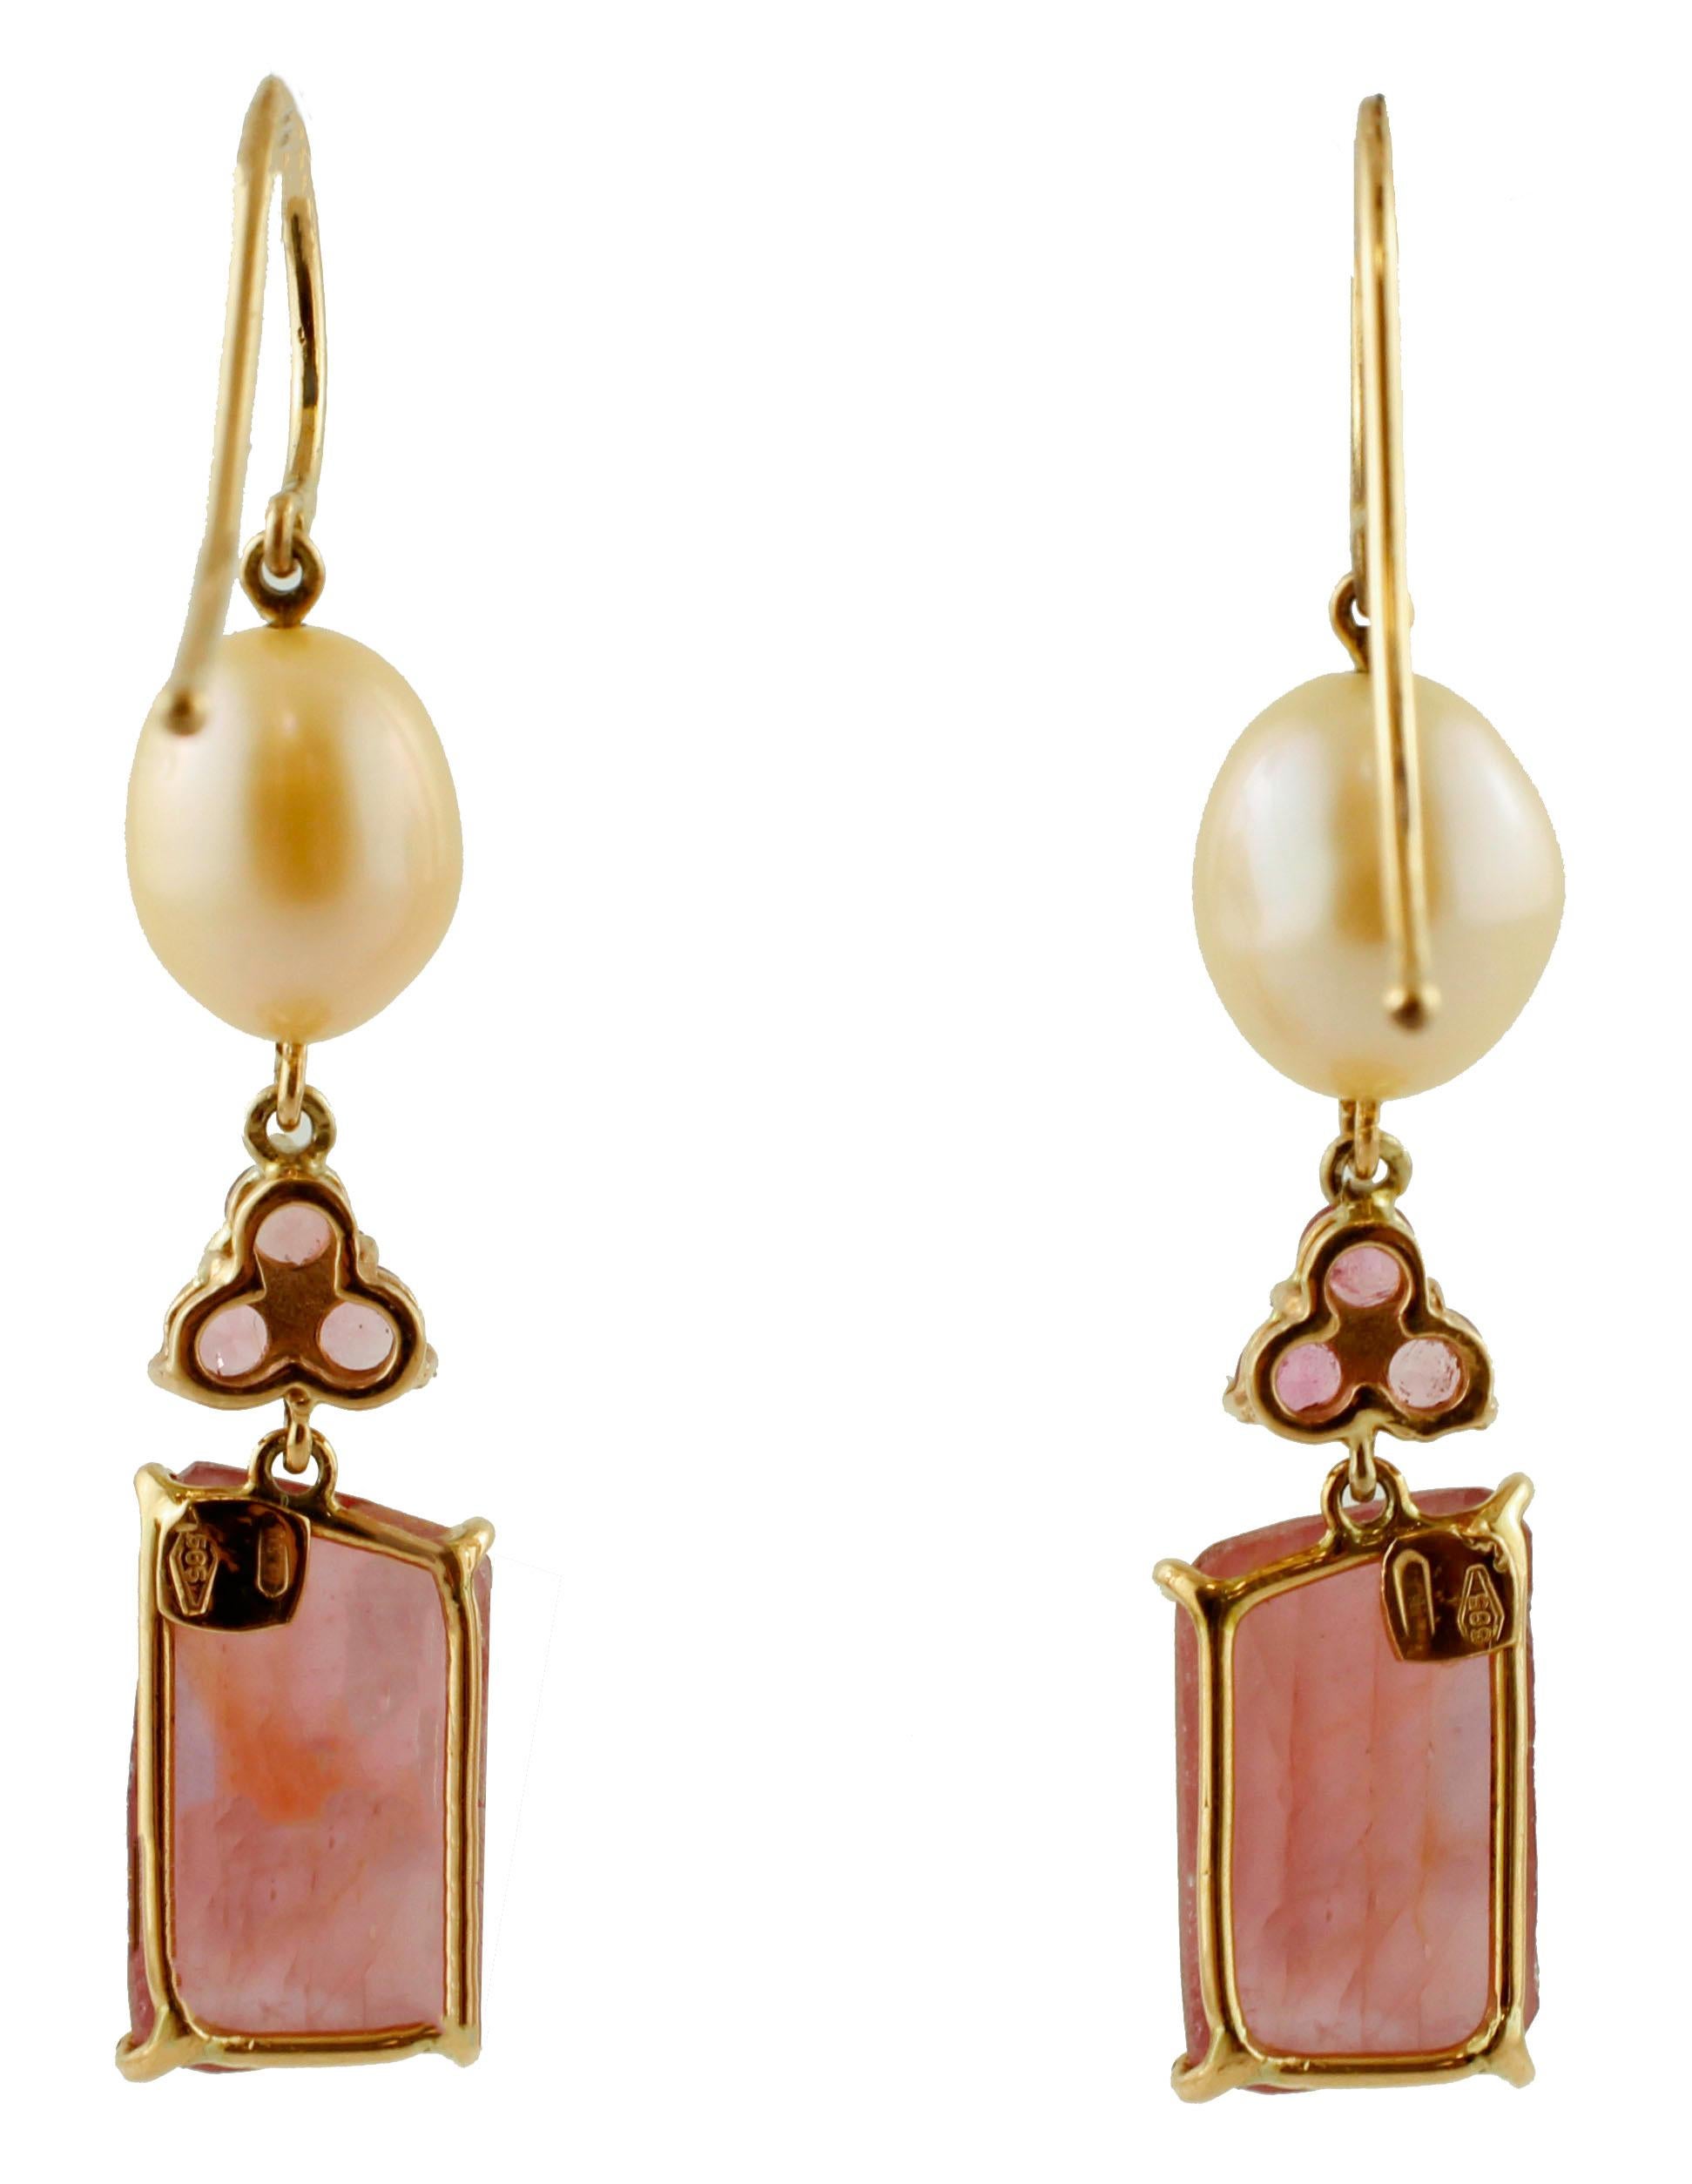 Particular dangle earrings in 14 kt rose gold structure, mounted with three sections: in the first part, there is a light pink pearl;  in the middle part three little tourmaline and, in the final part, a sapphire.
These earrings are totally handmade